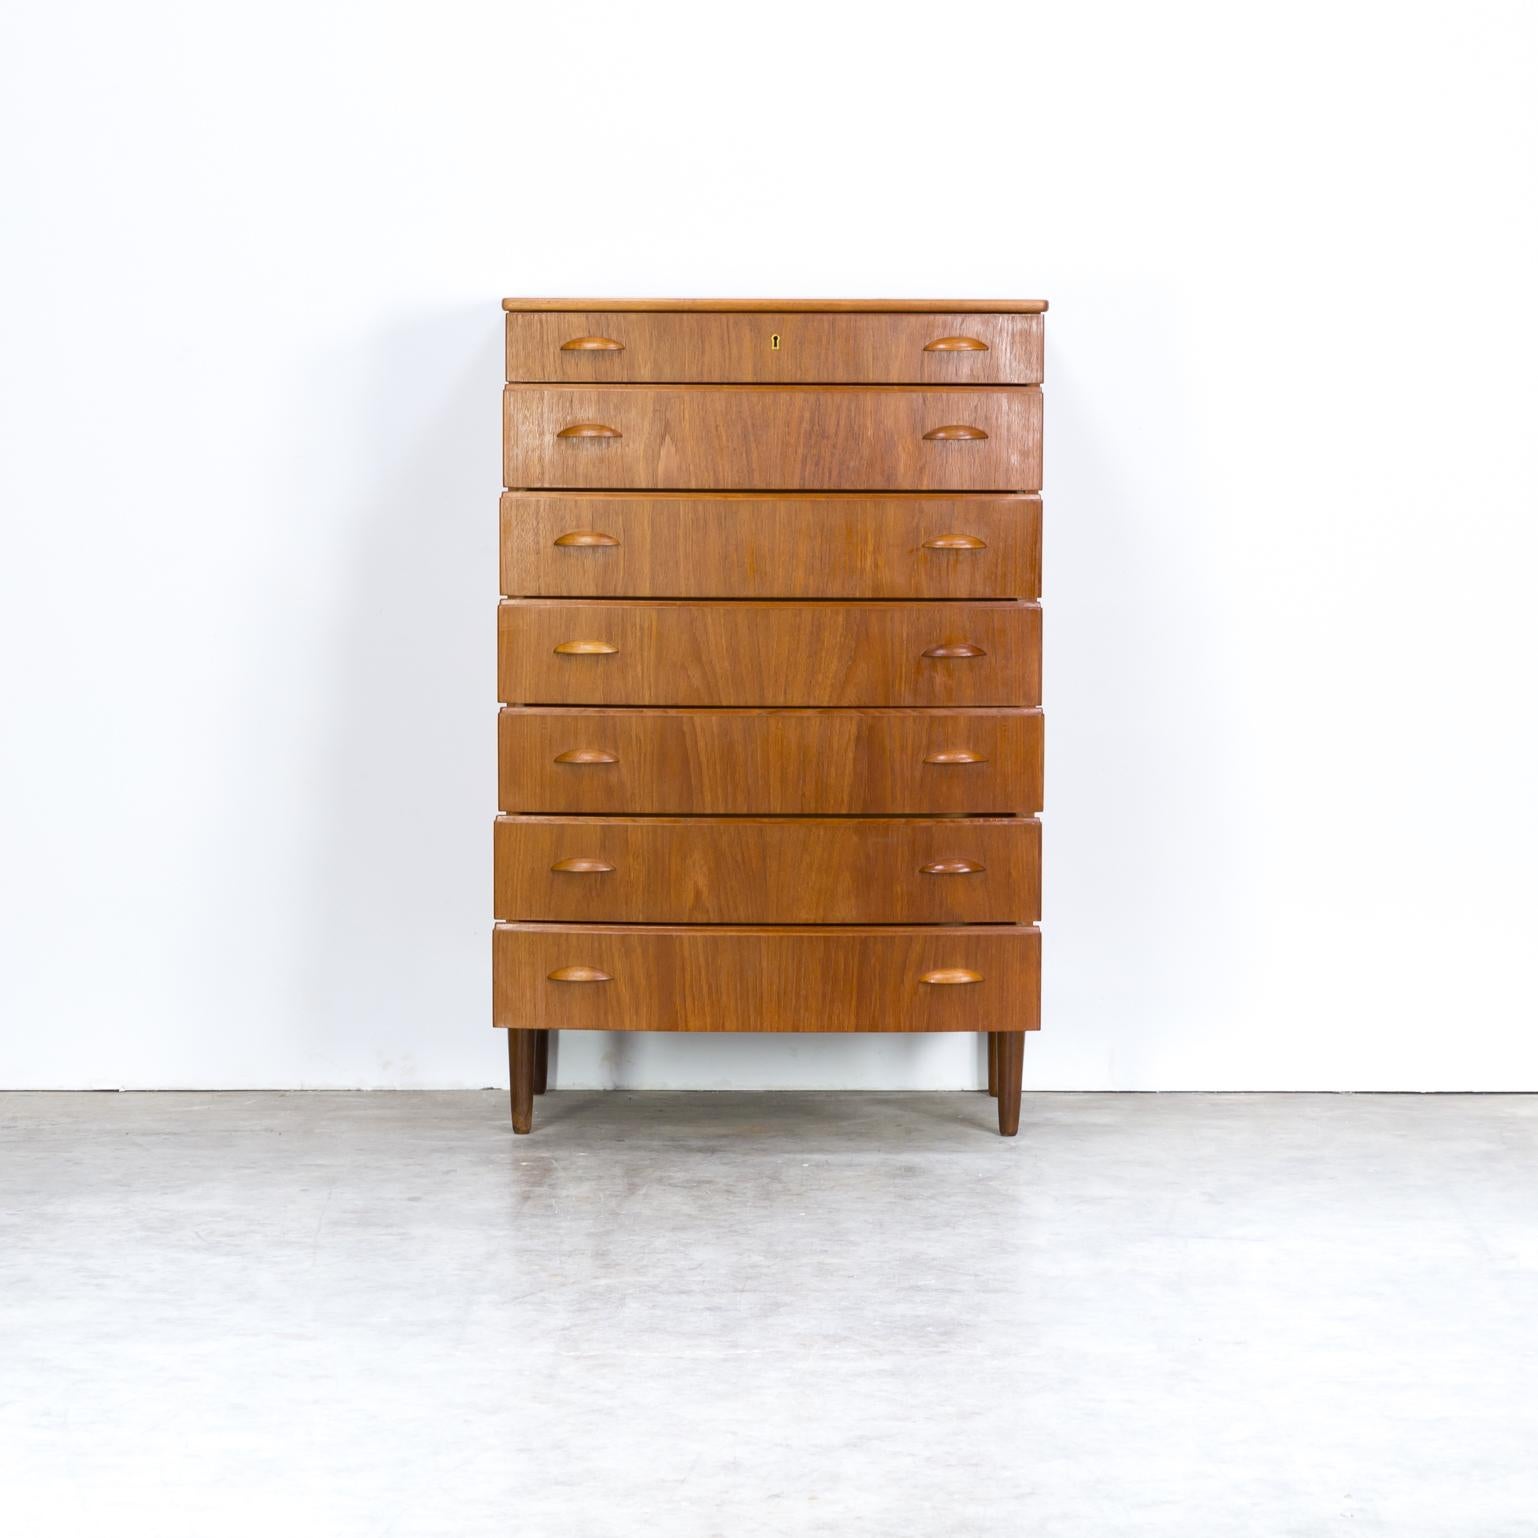 60s Beautiful teak veneer seven drawer cabinet. Good condition, consistent with age and use.